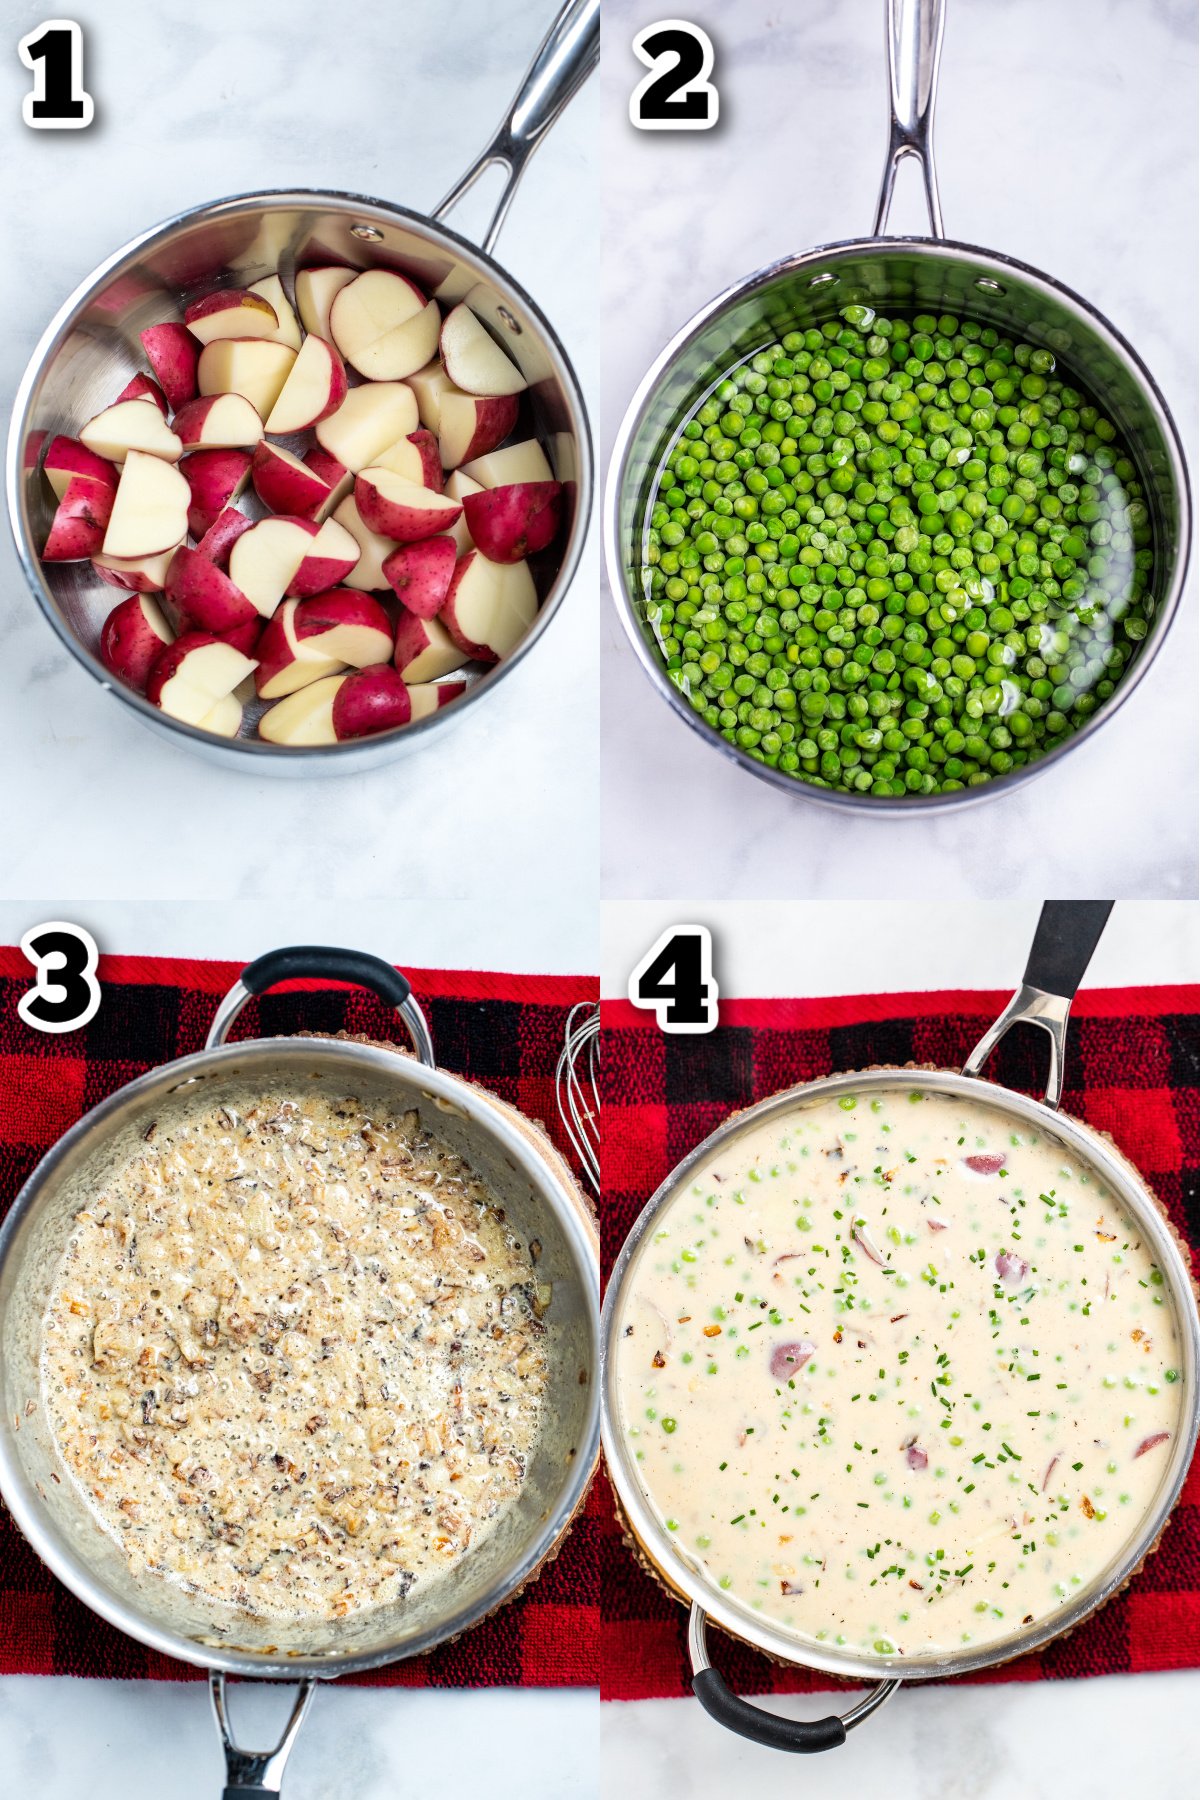 Step by step photos for how to make creamed peas and potatoes.